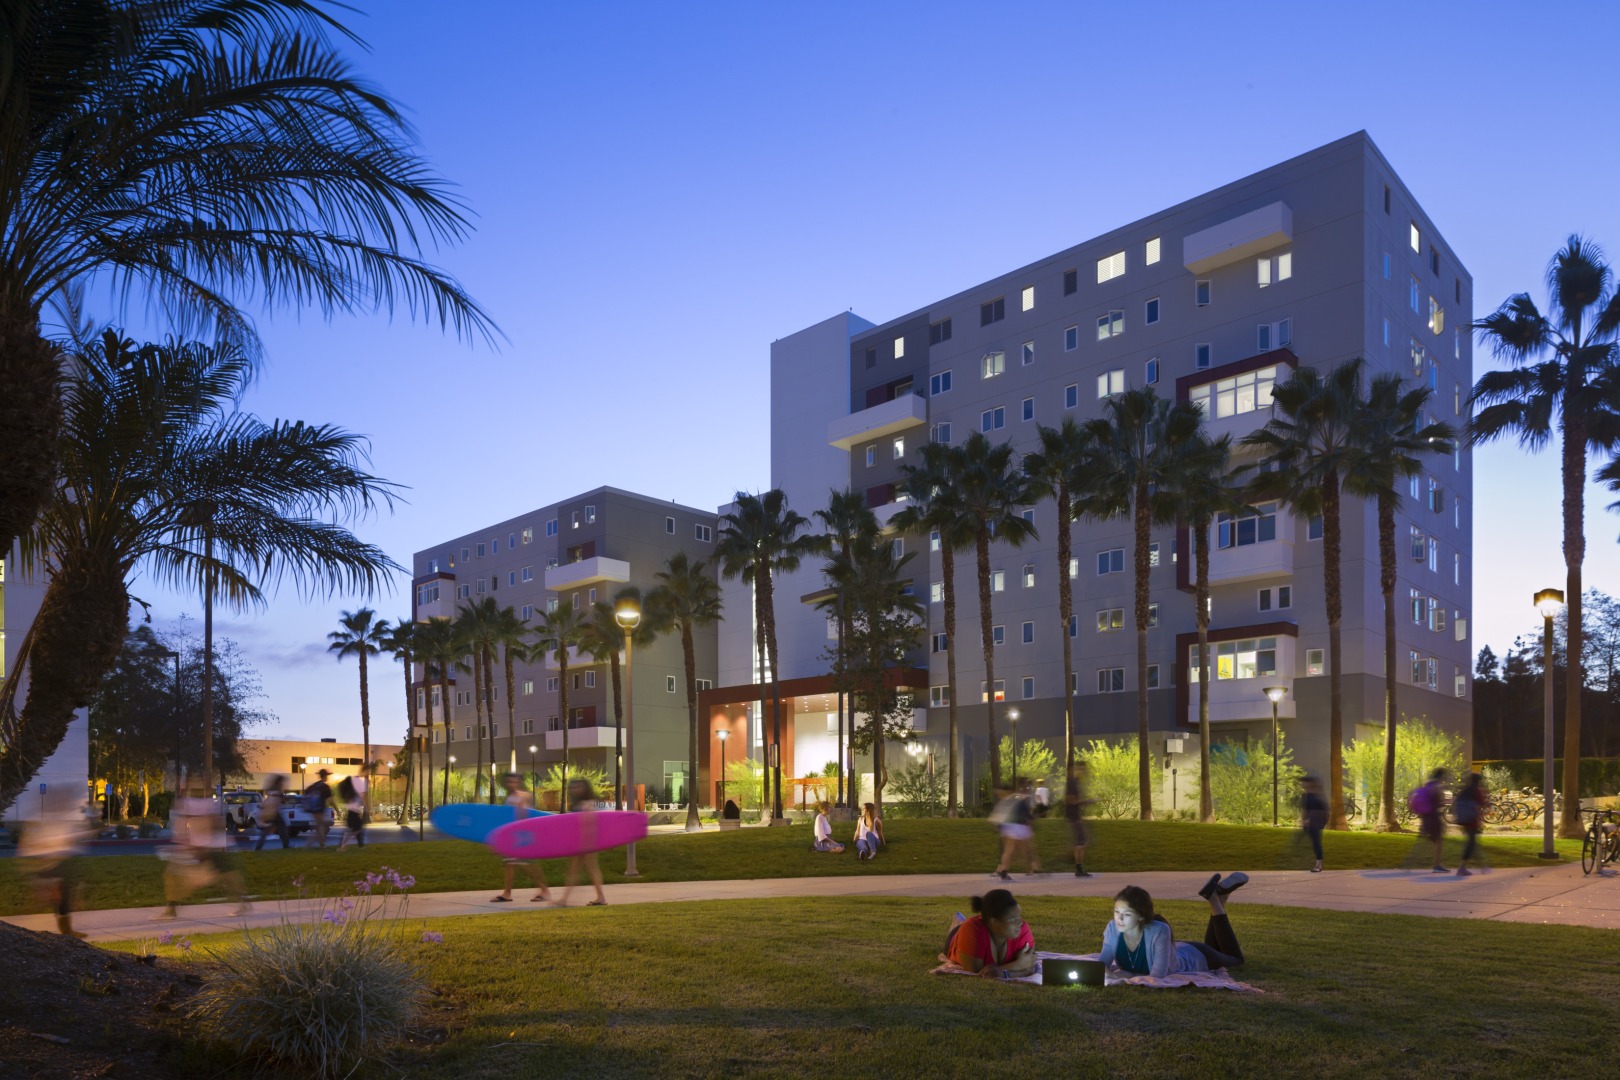 New student college building design at San Diego State University.